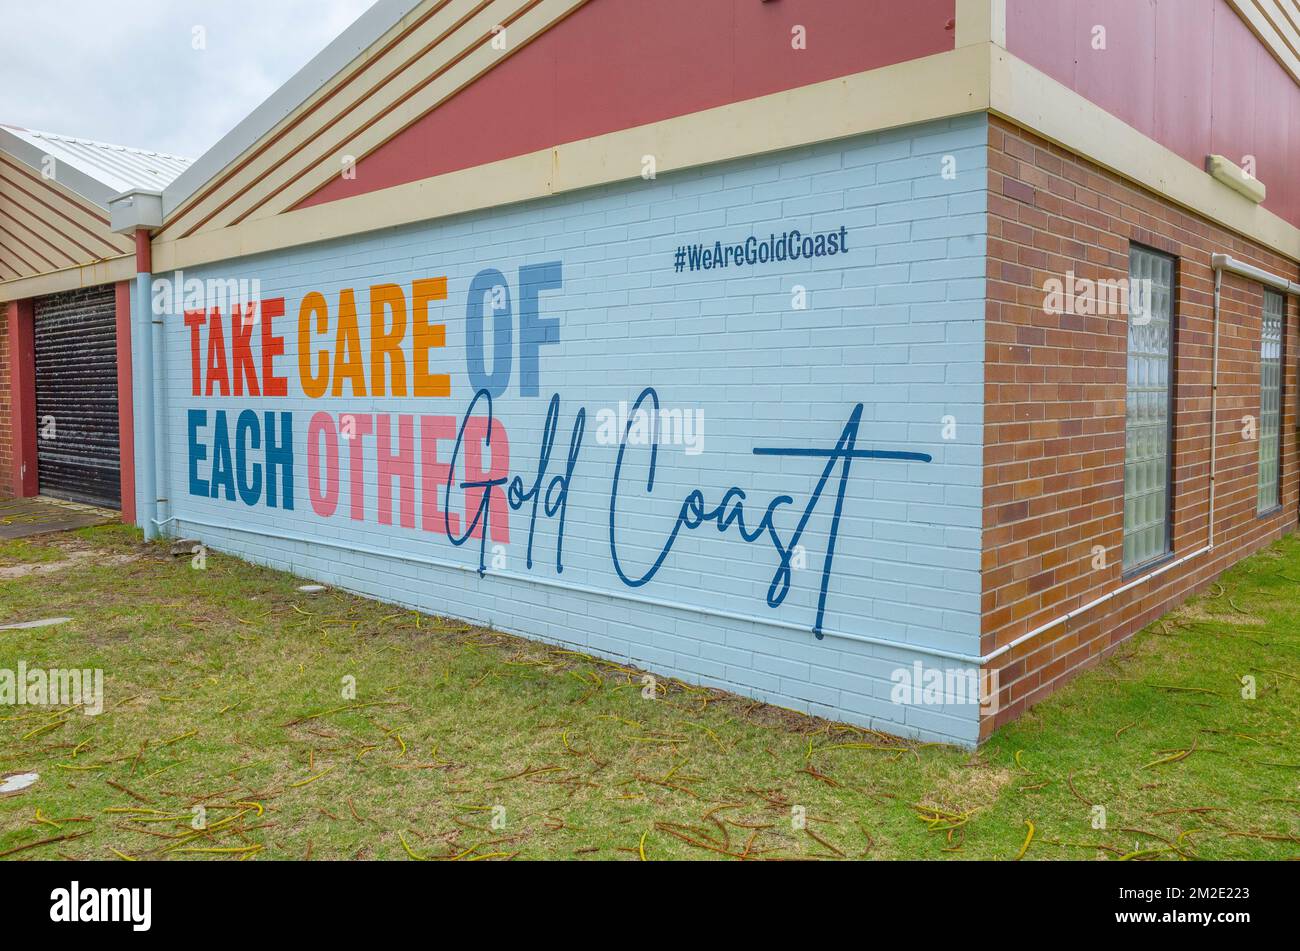 The John Cunningham Lifeguard Centre at Coolangatta, gold coast, queensland, australia with sign 'take care of each other' on the wall facing the road Stock Photo